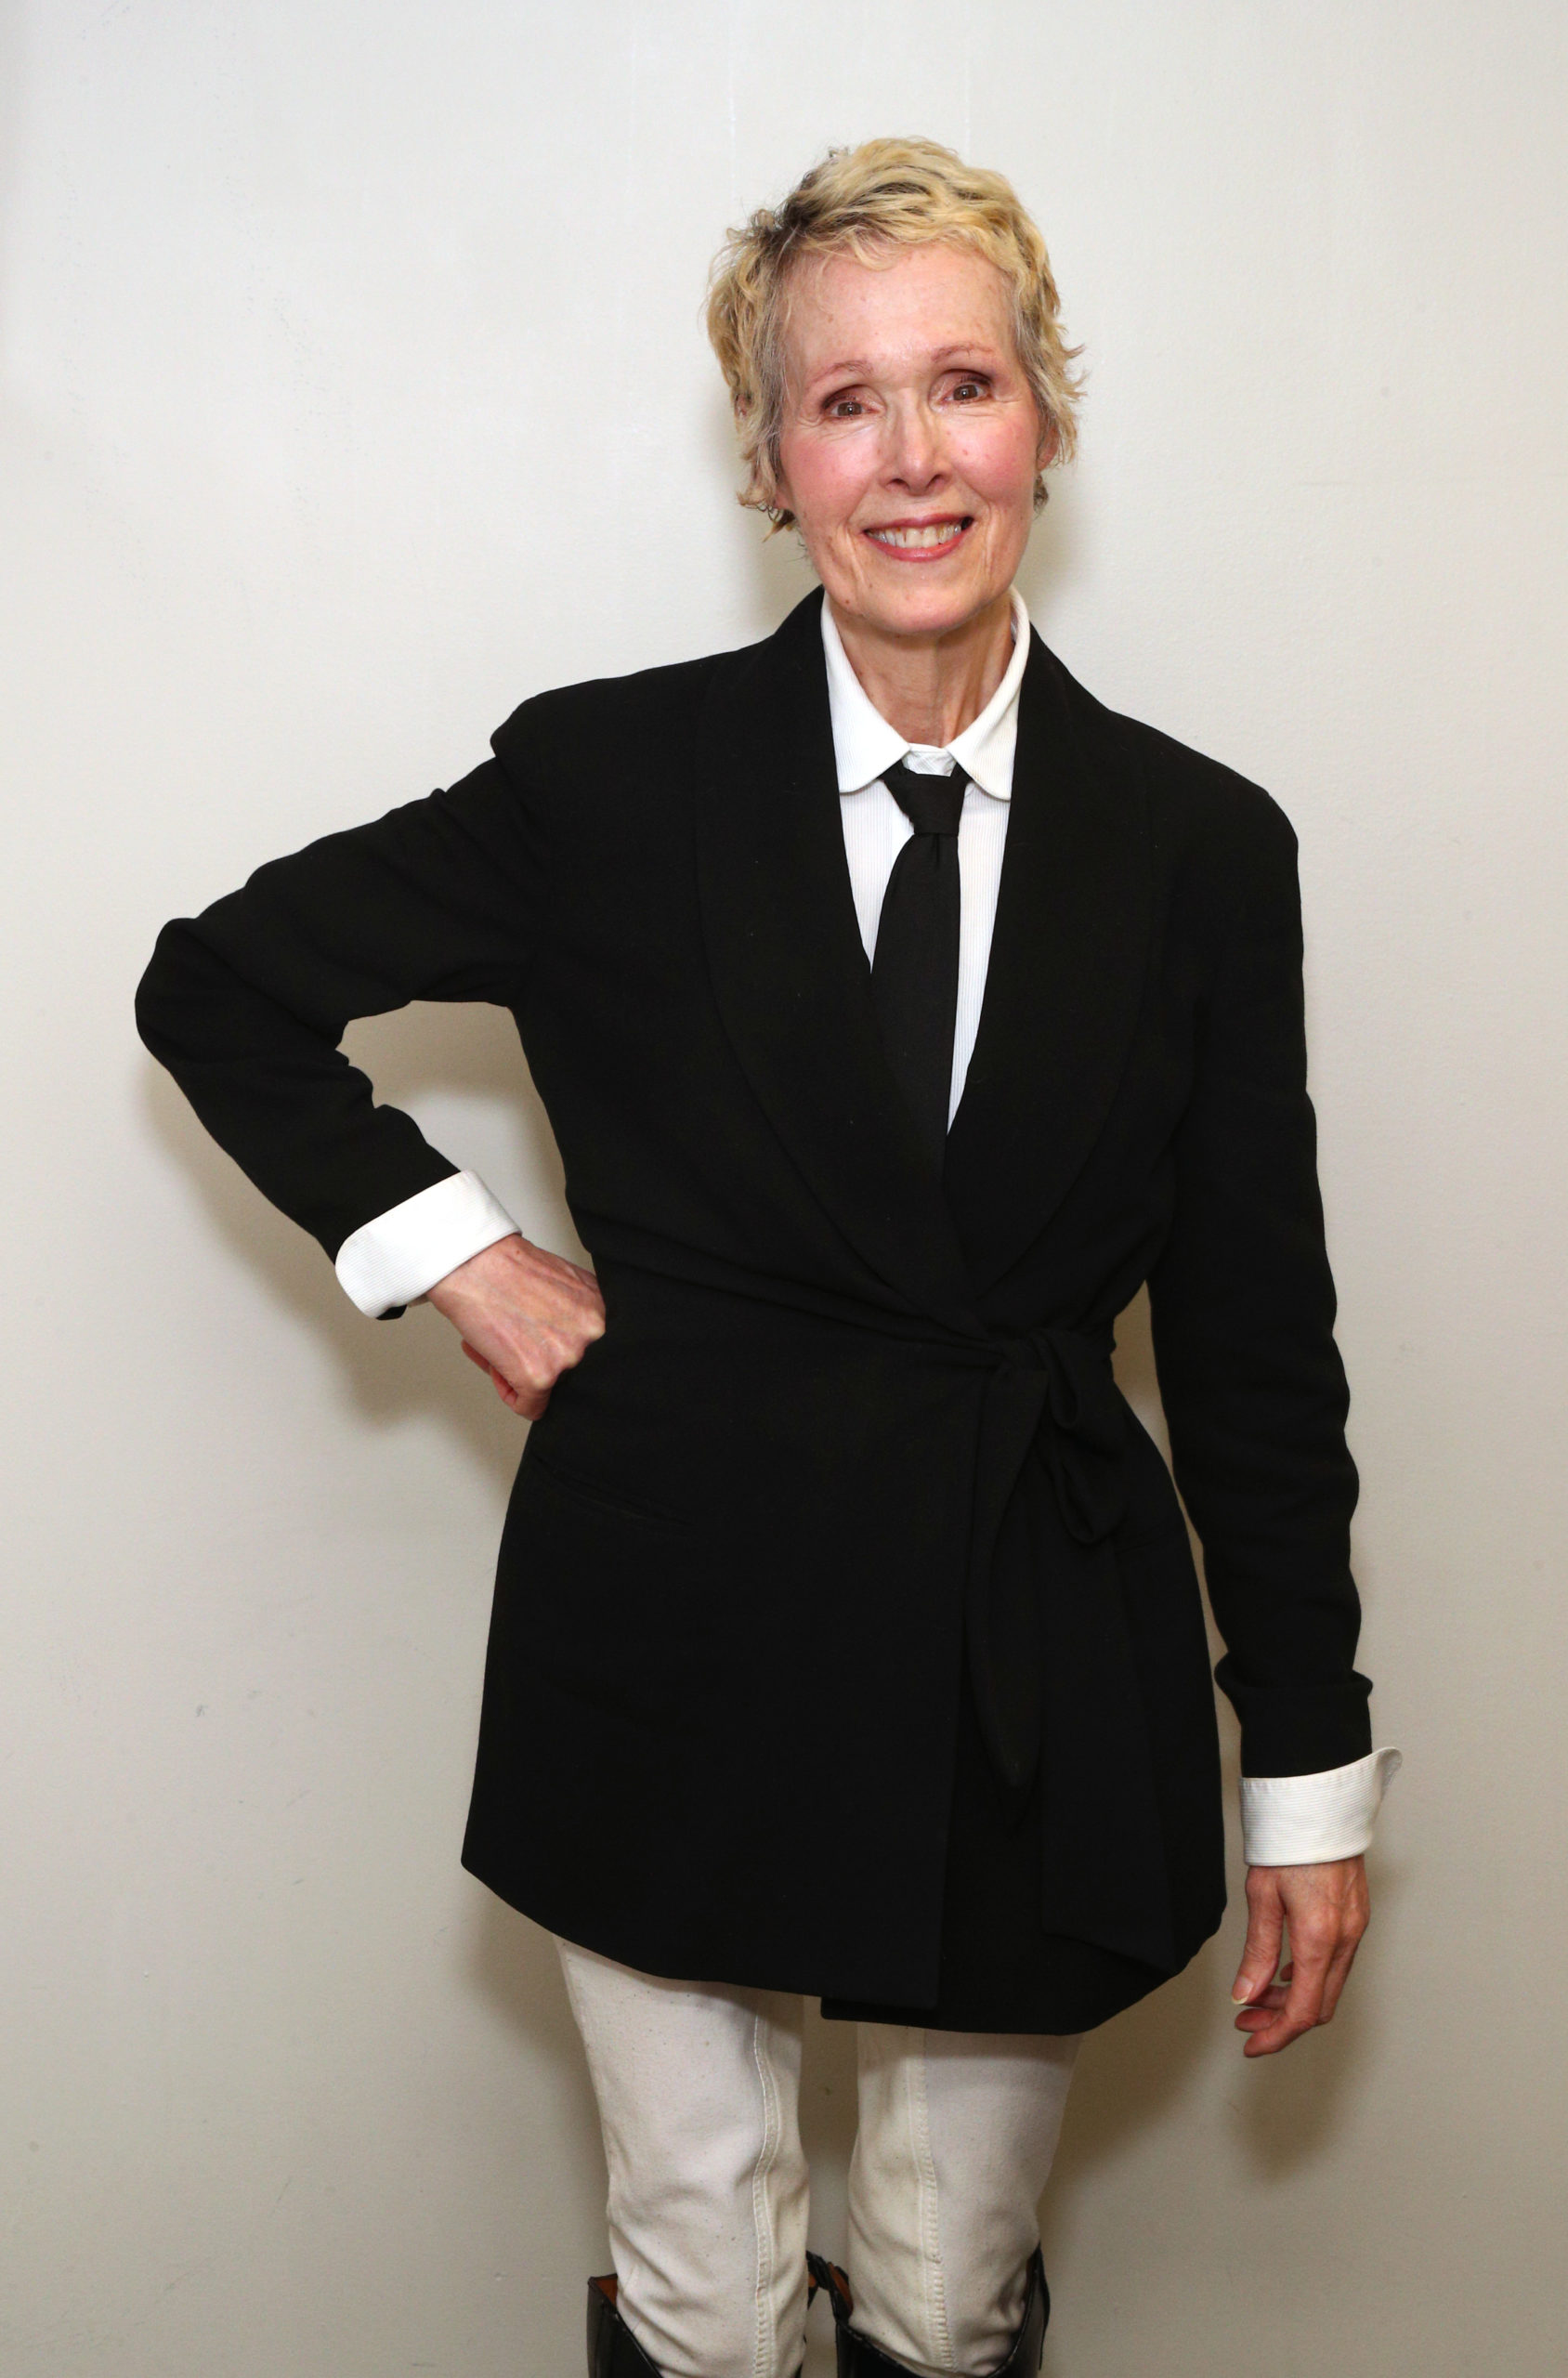 NEW YORK, NEW YORK - NOVEMBER 10: E. Jean Carroll attends the 2019 Glamour Women Of The Year Summit at Alice Tully Hall on November 10, 2019 in New York City. (Photo by Astrid Stawiarz/Getty Images for Glamour)